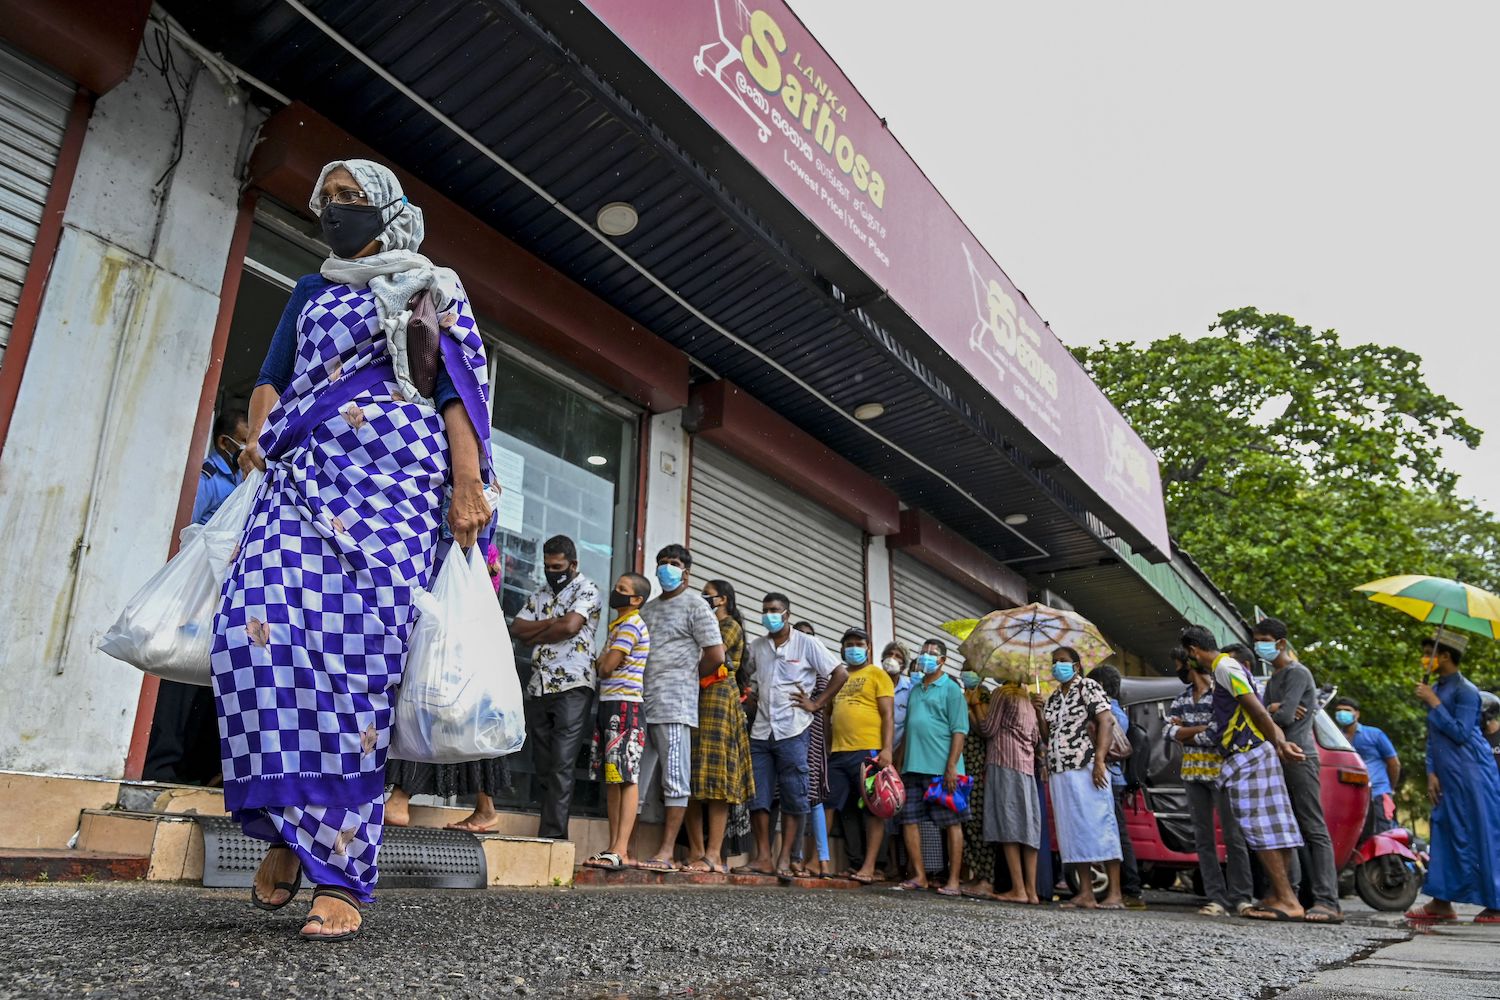 A woman carrying food bags walks pasts people standing in queue outside a state-run supermarket to buy essential food items in Colombo on September 3, 2021 as Sri Lanka began imposing price controls on essential food from September 3 after using a state of emergency to seize allegedly hoarded stocks of sugar and rice. (Photo by Ishara S. KODIKARA / AFP) (Photo by ISHARA S. KODIKARA/AFP via Getty Images)